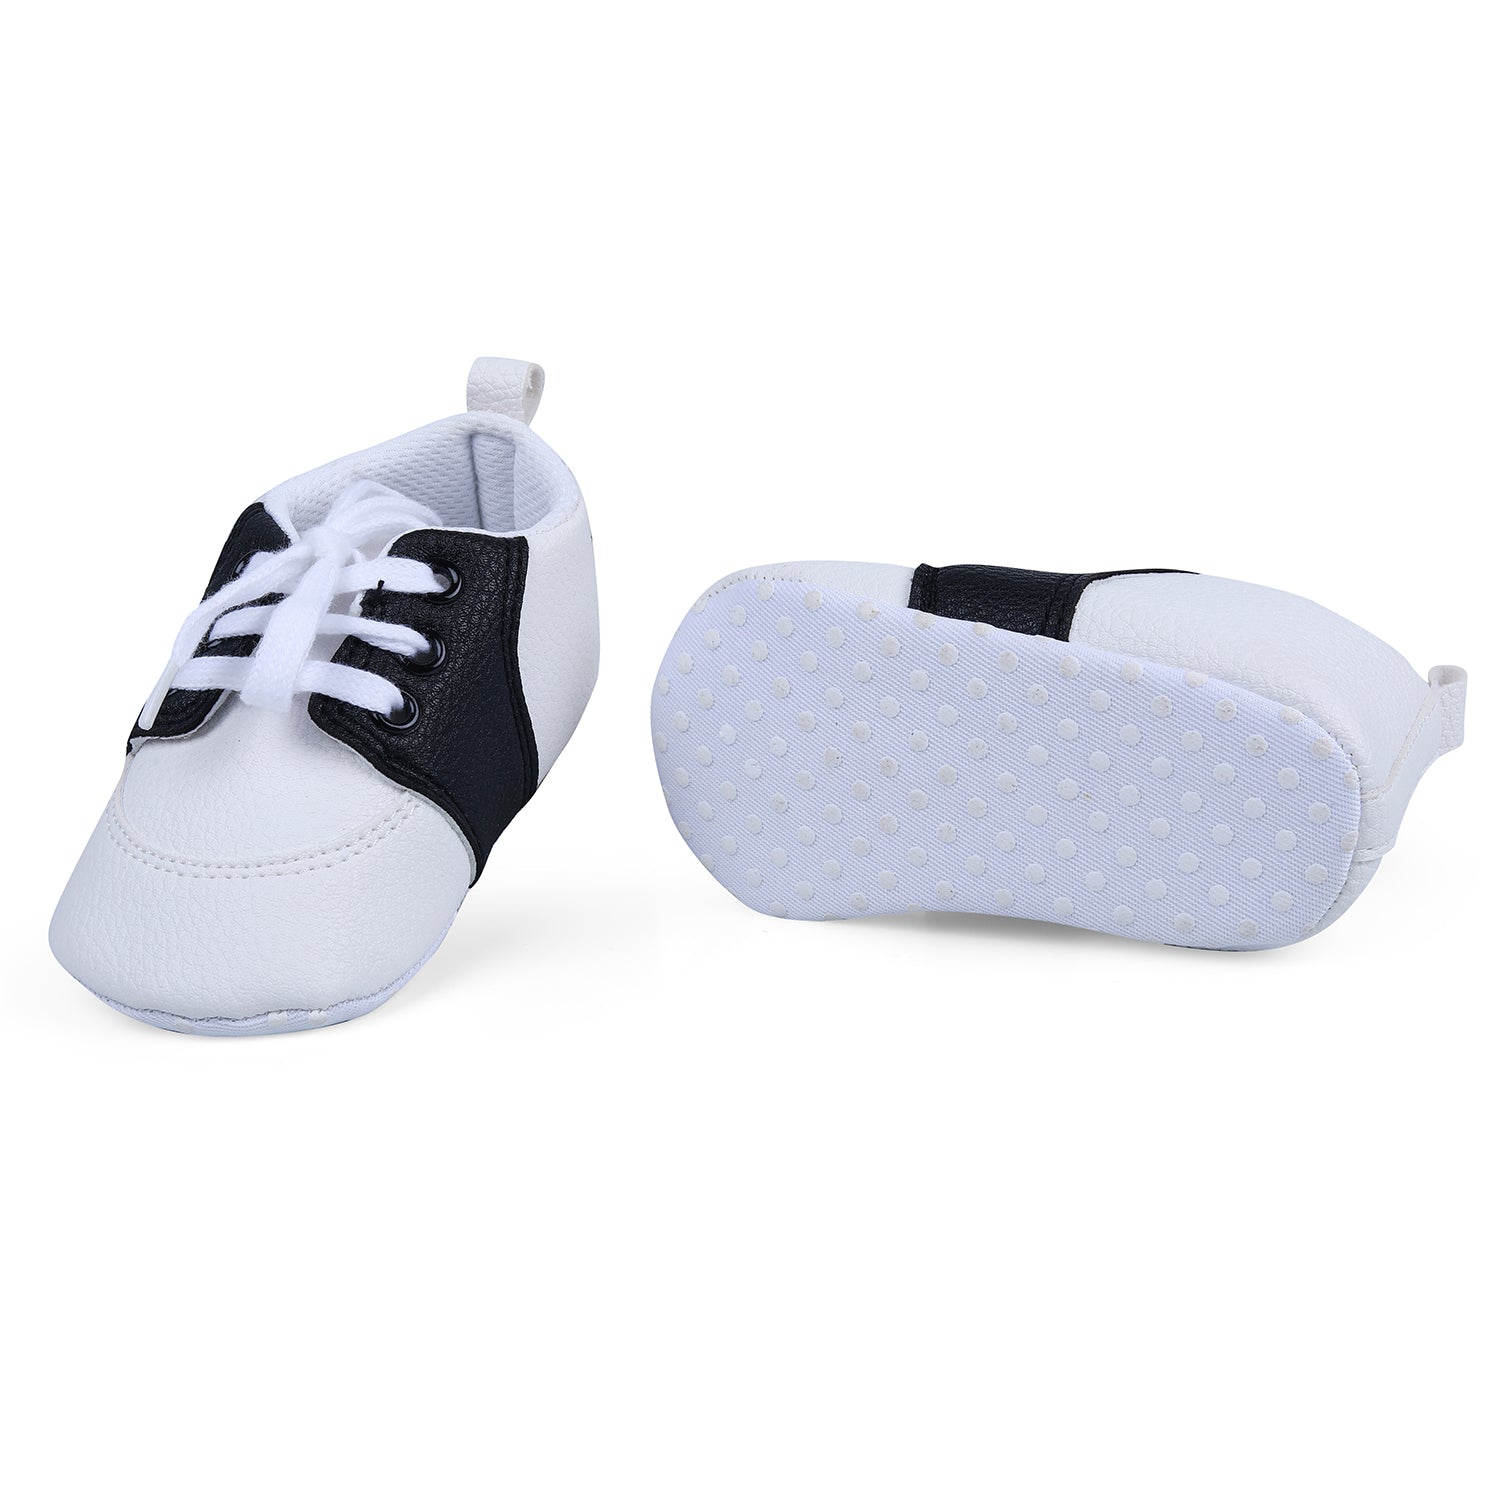 Lace-Up Stylish Leather Sneaker Shoes - Black - Baby Moo